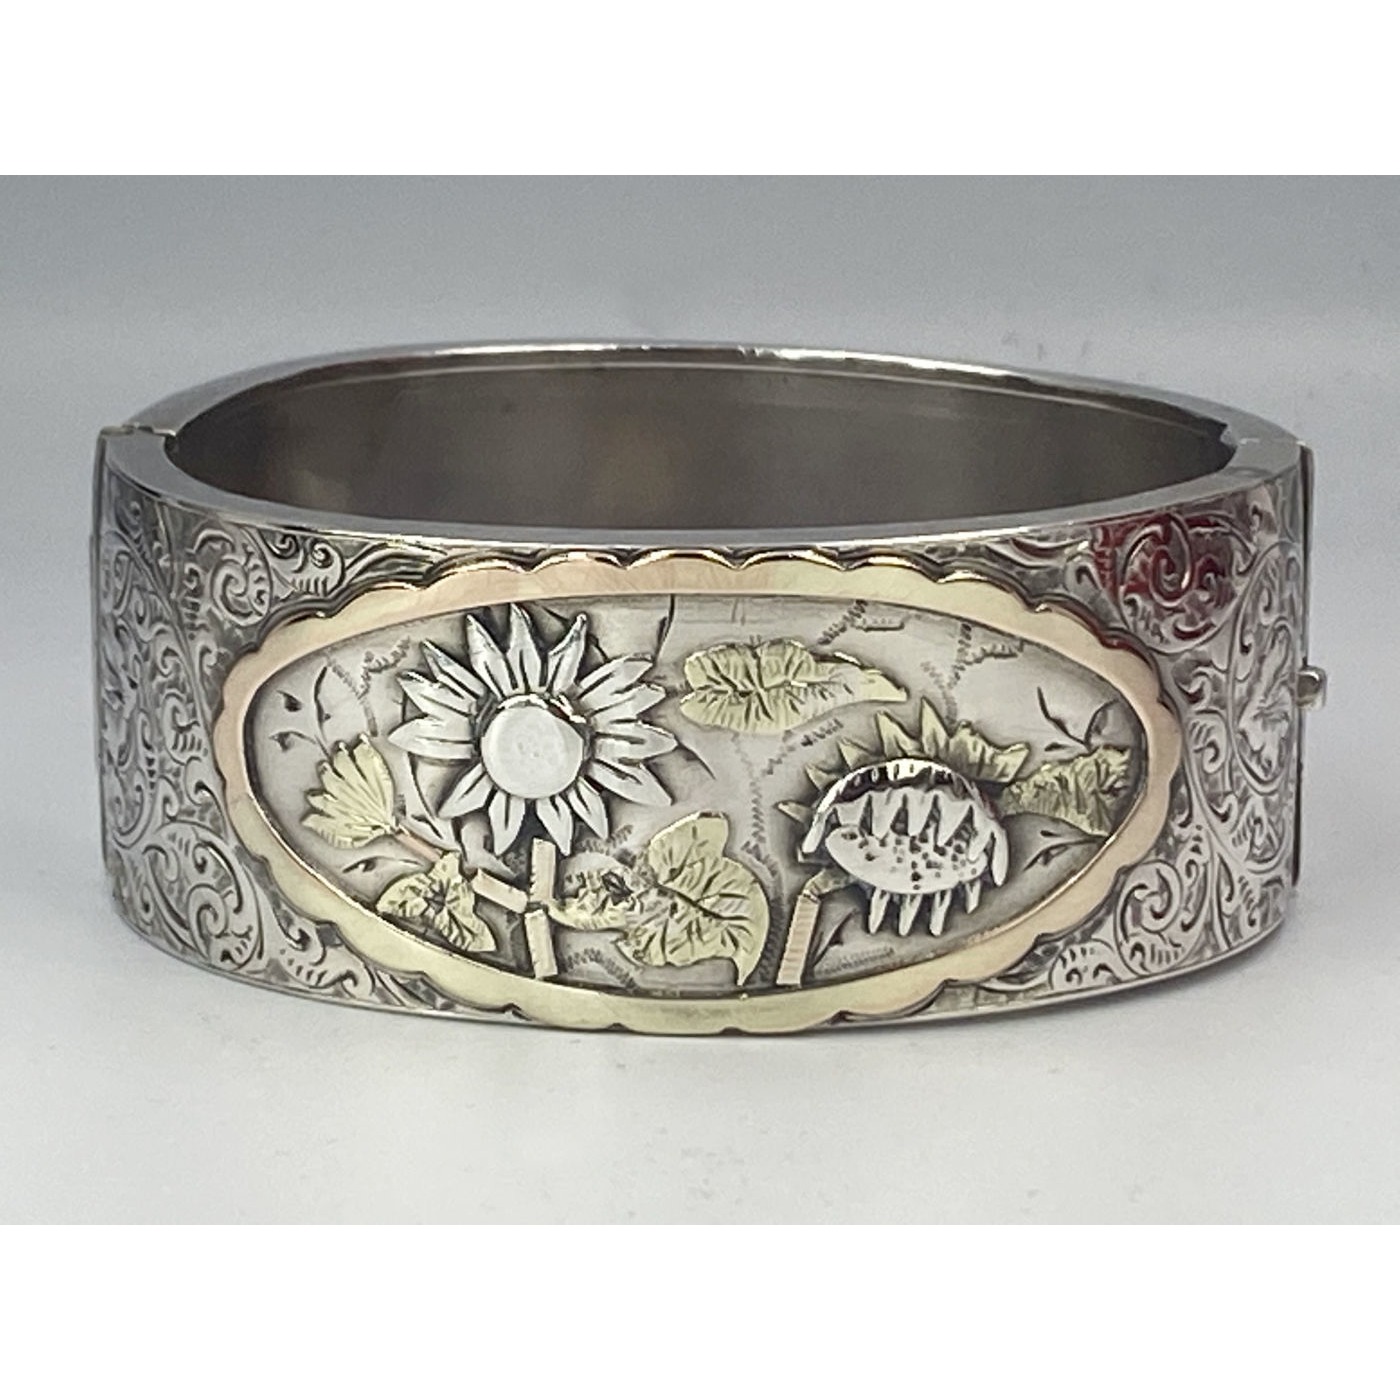 Raised, Bold Sunflower-type Flowers, Rose and Yellow Gold Decoration, English Silver Bangle